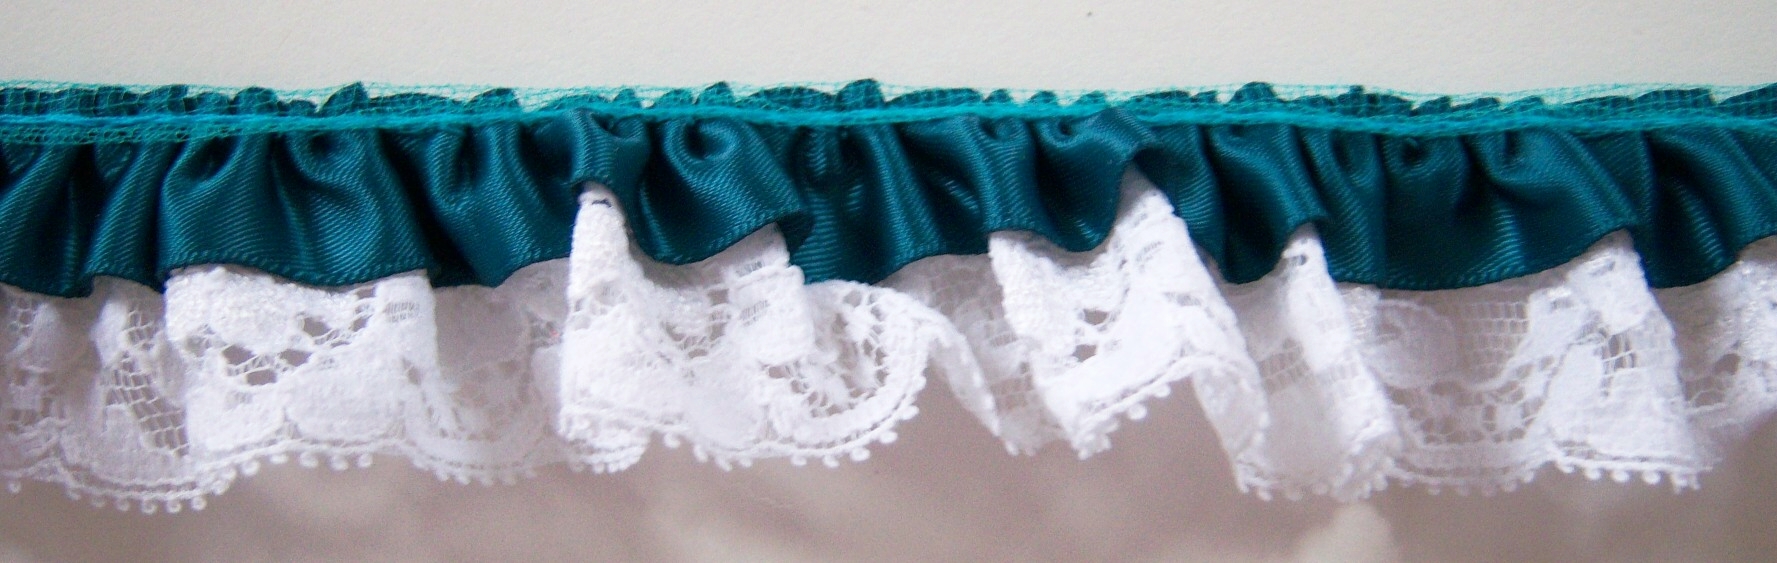 Teal Satin/White 1 1/4" Ruffled Lace